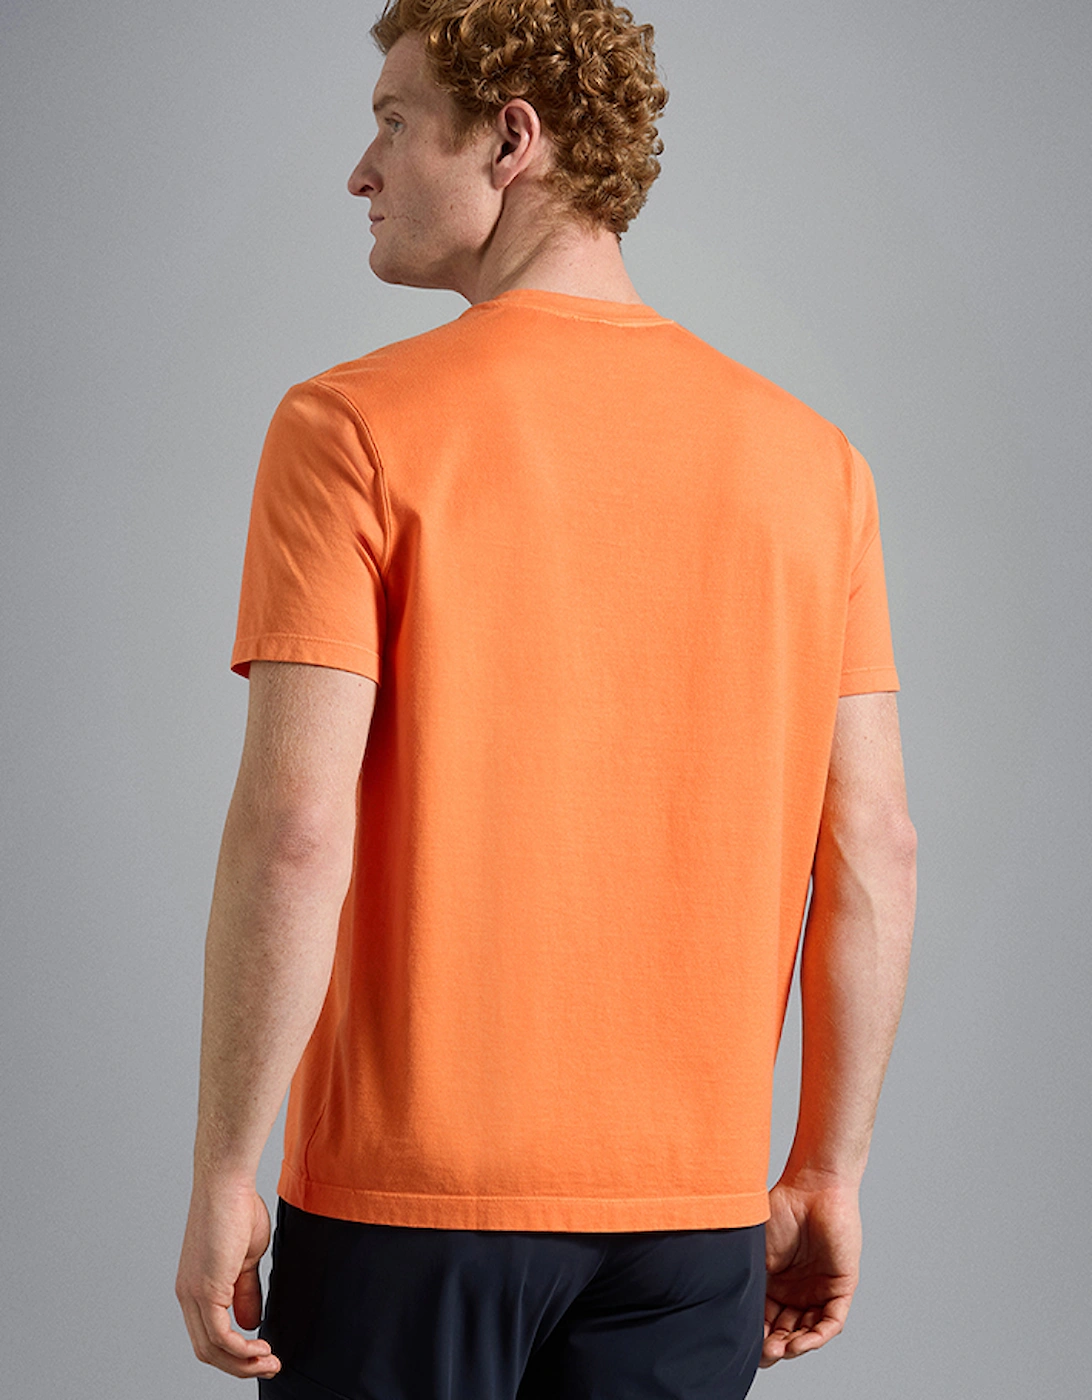 Men's Garment Dyed Cotton T-Shirt with Iconic Badge